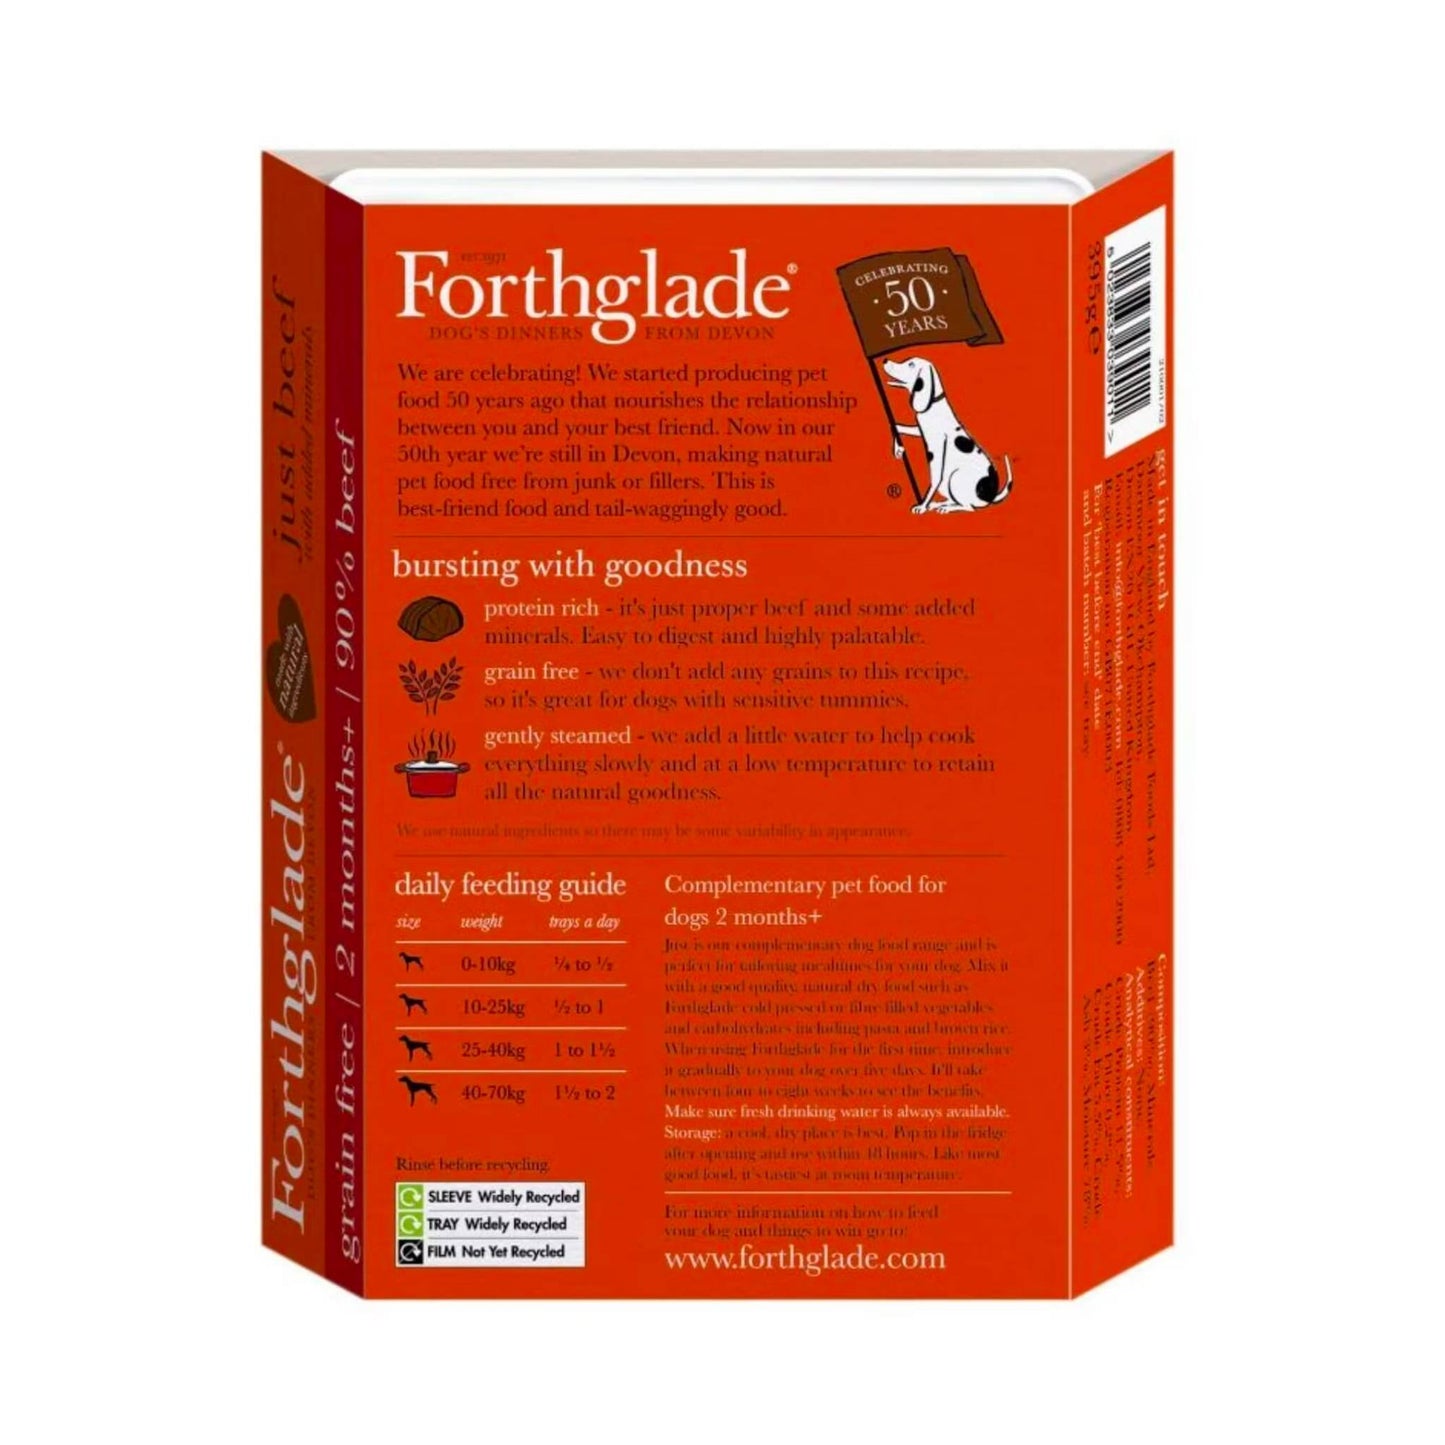 Forthglade Just Beef ingredients and feeding guide. 